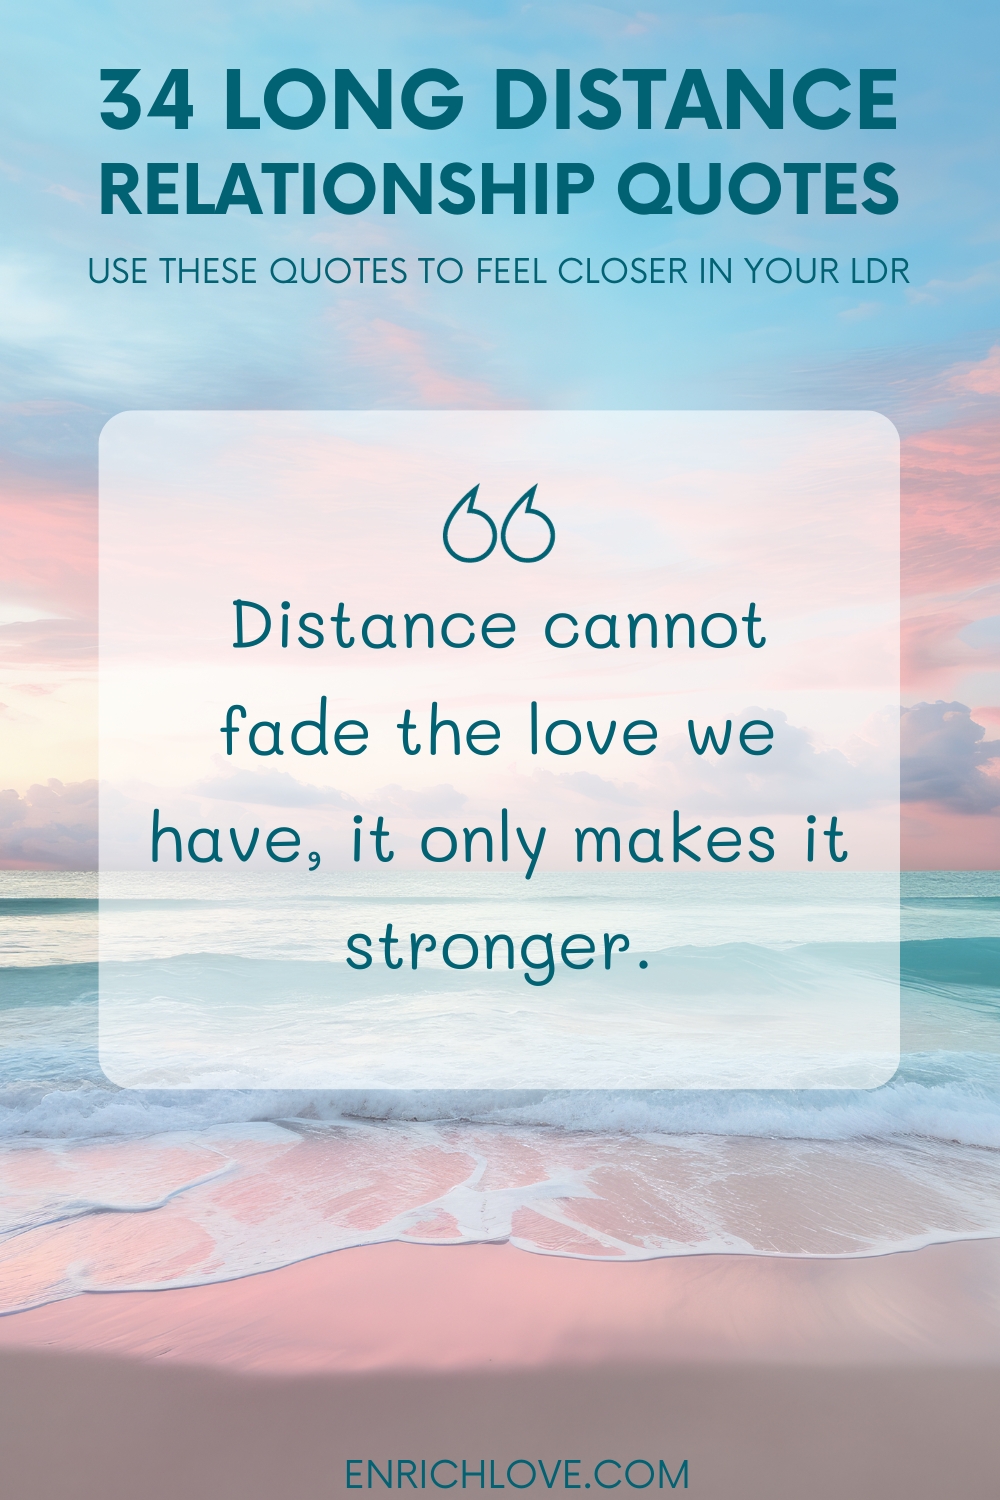 34 Long Distance Relationship Quotes - Distance cannot fade the love we have, it only makes it stronger.